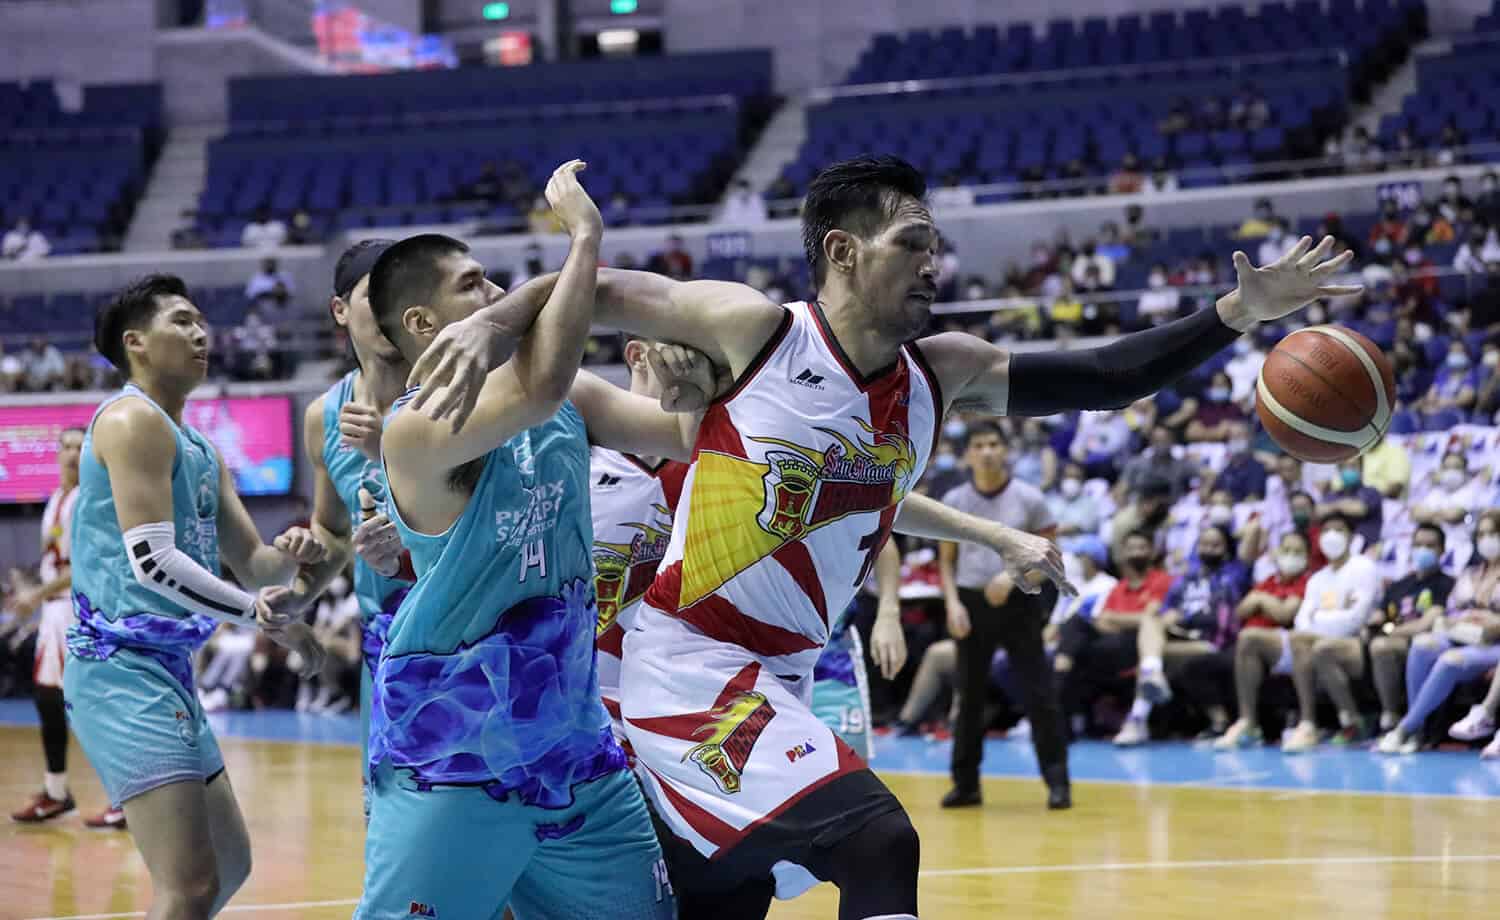 A San Miguel Beermen basketball player is striving to score in a game against Phoenix.